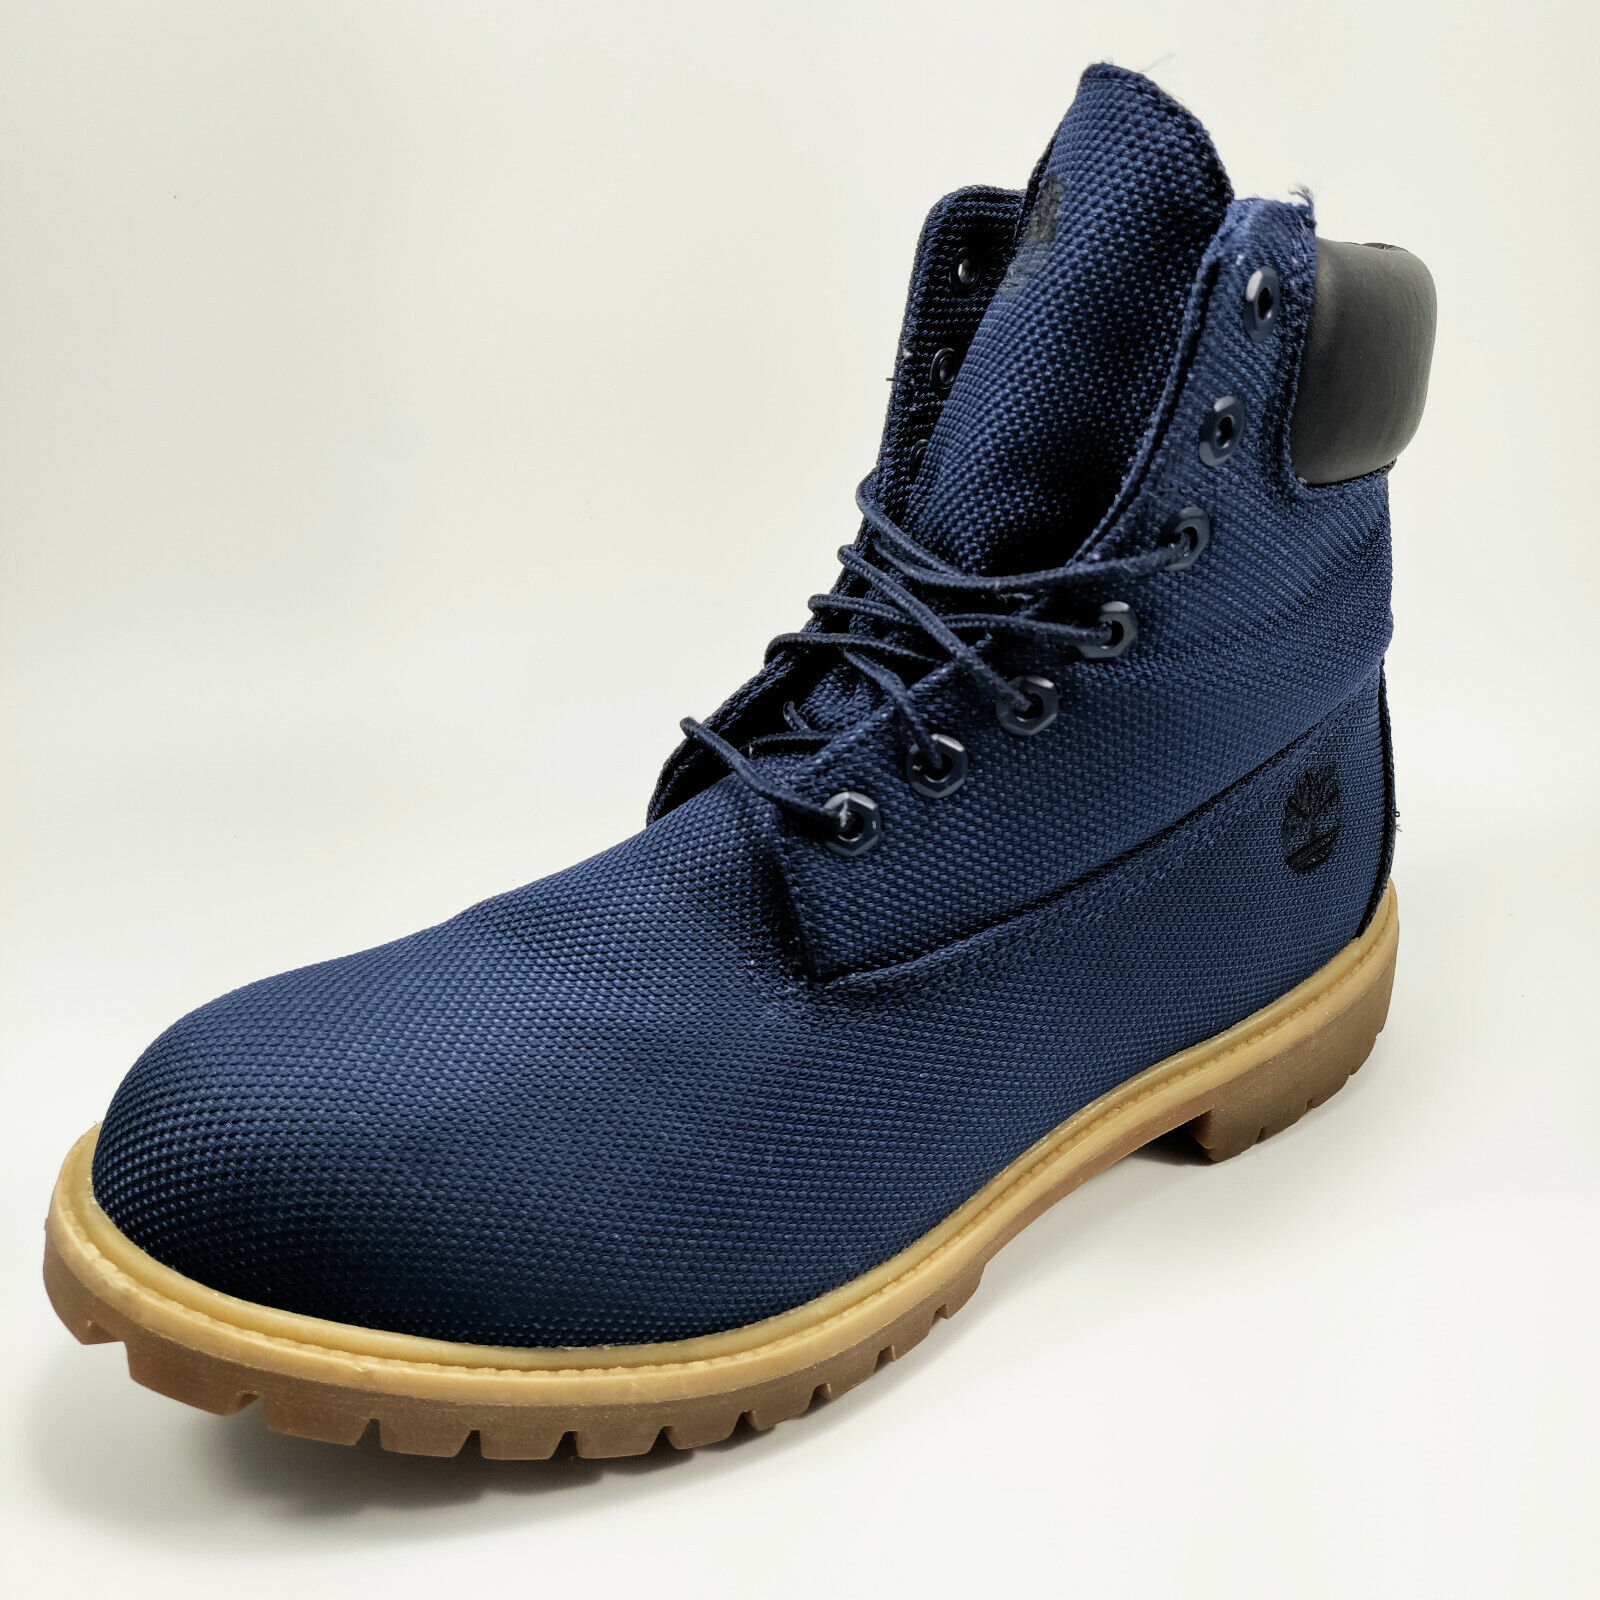 Holiday Commander protection Timberland 6 Inch Premium Waterproof Boots Men's Navy Blue / Tan A1M285140  SZ 12 | eBay